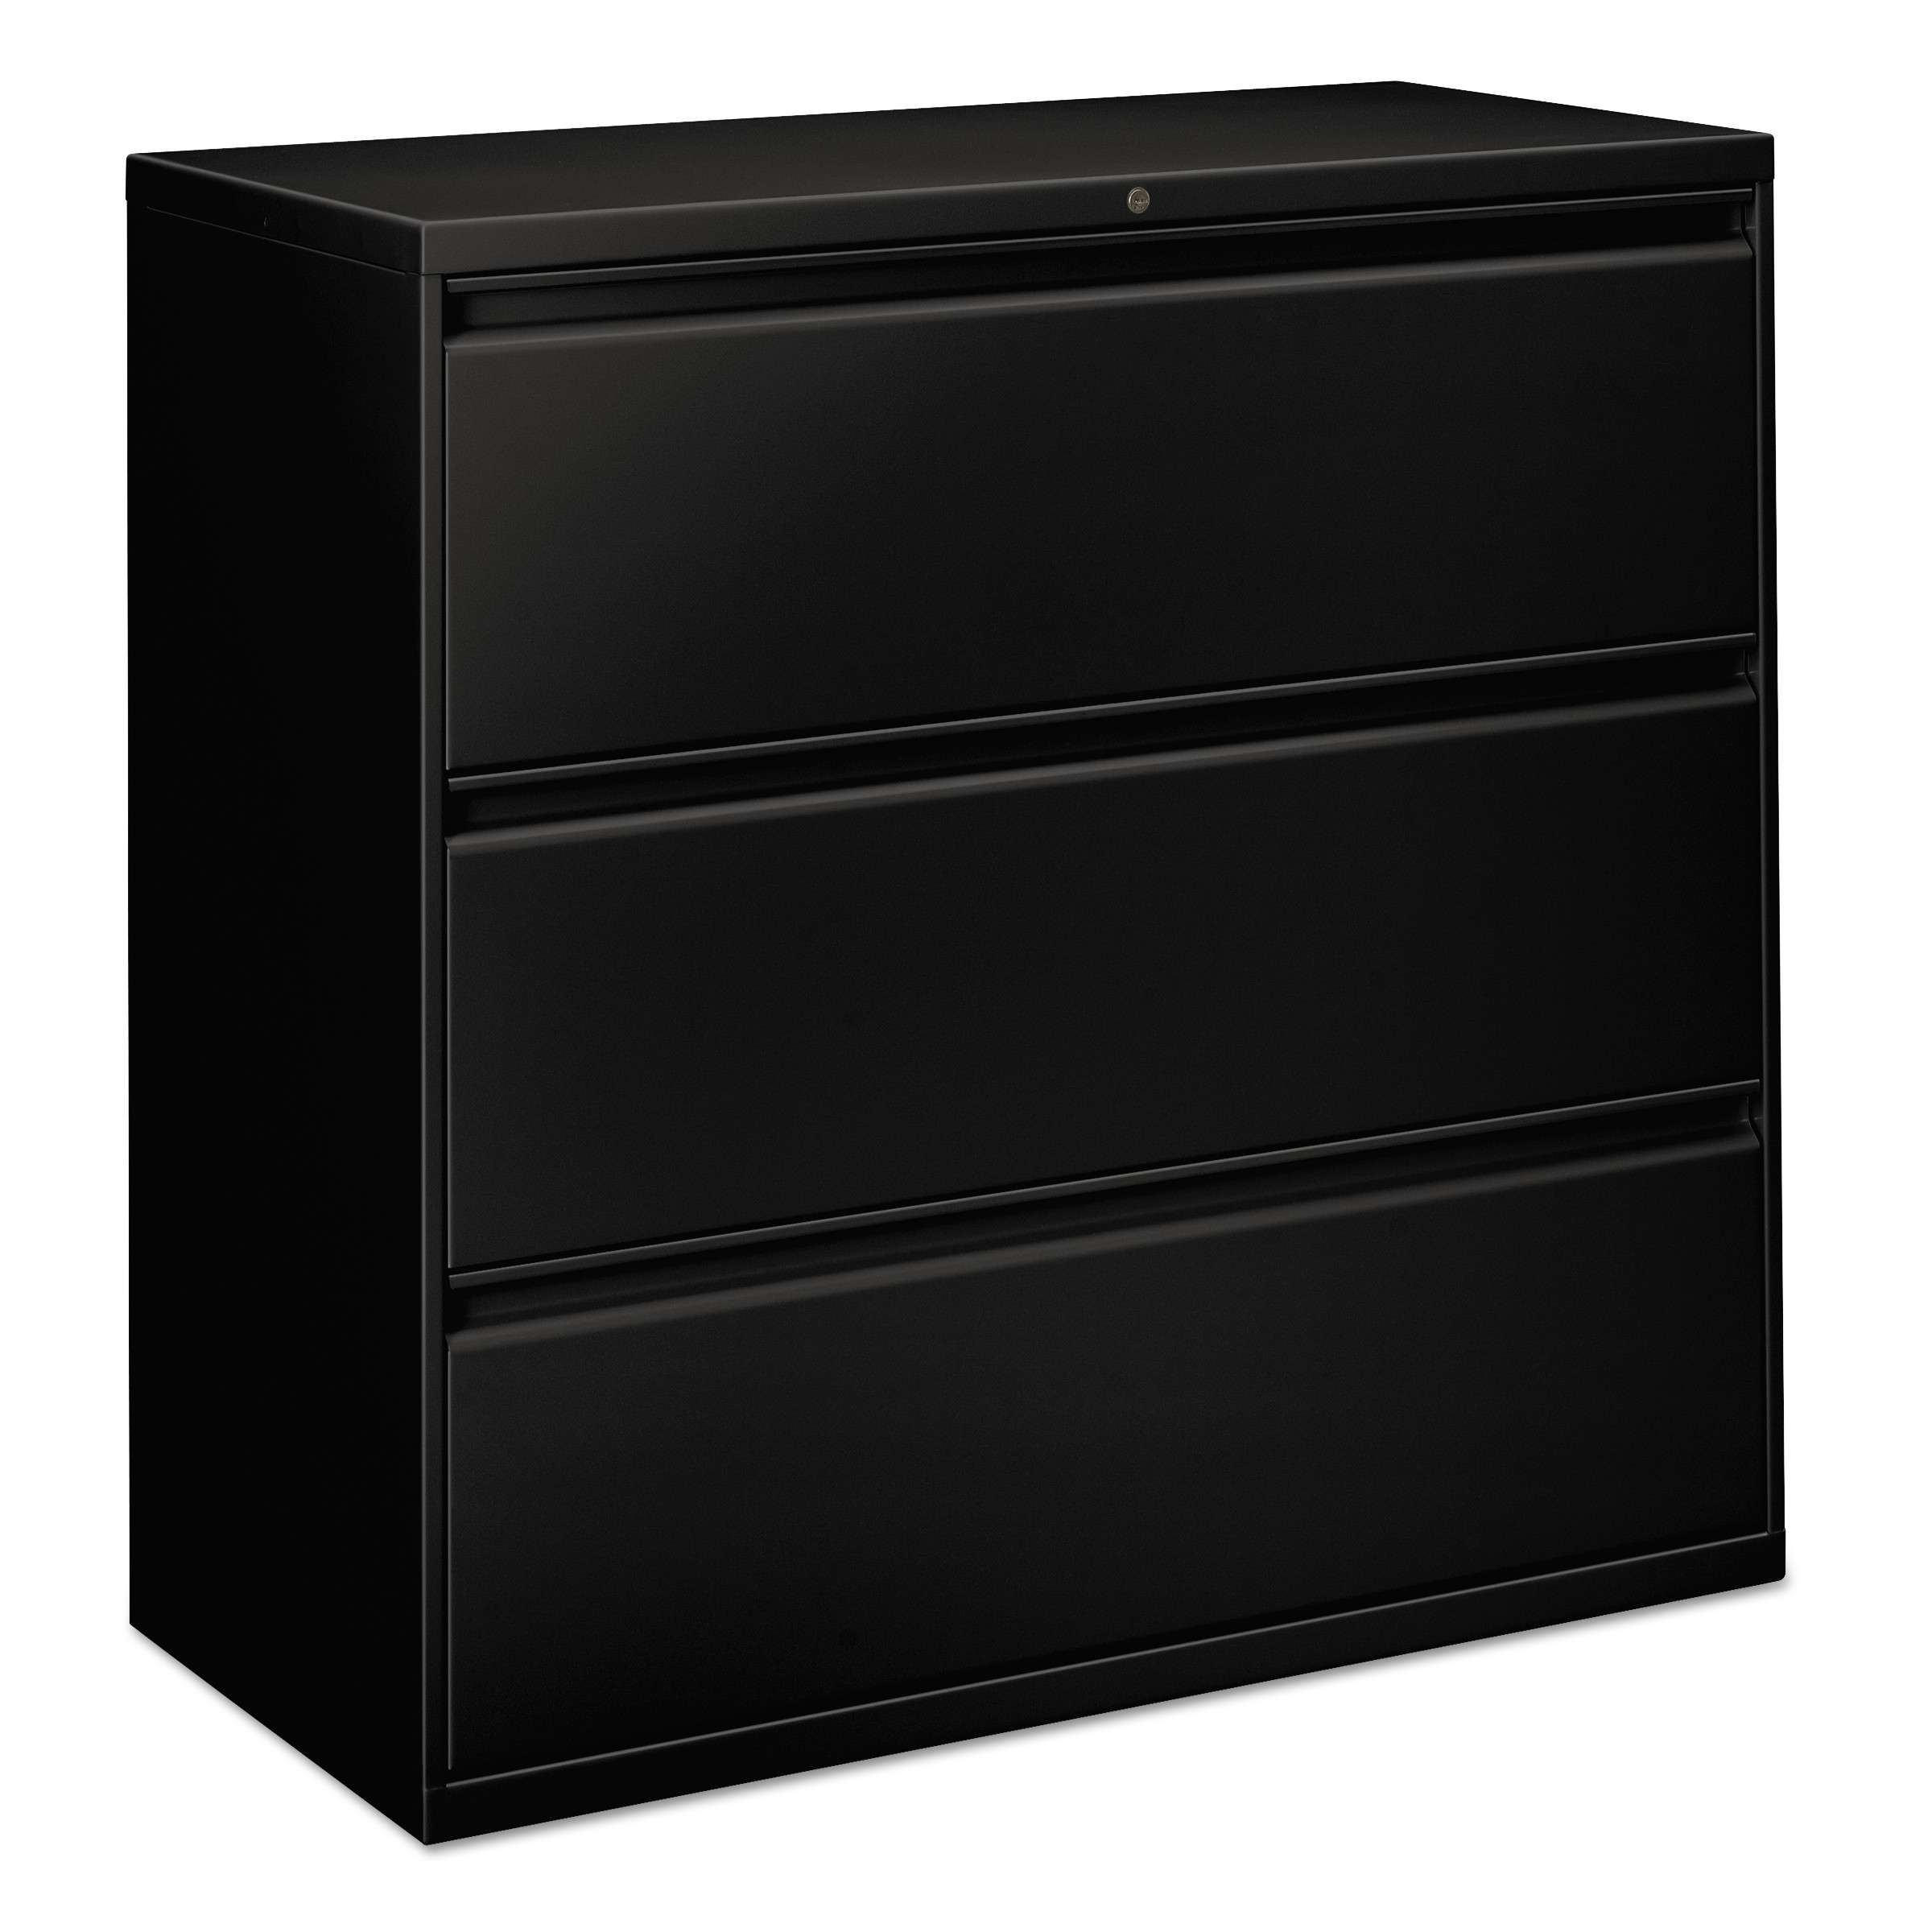 Three-Drawer Lateral File Cabinet, 42w x 18d x 39 1/2h, Black